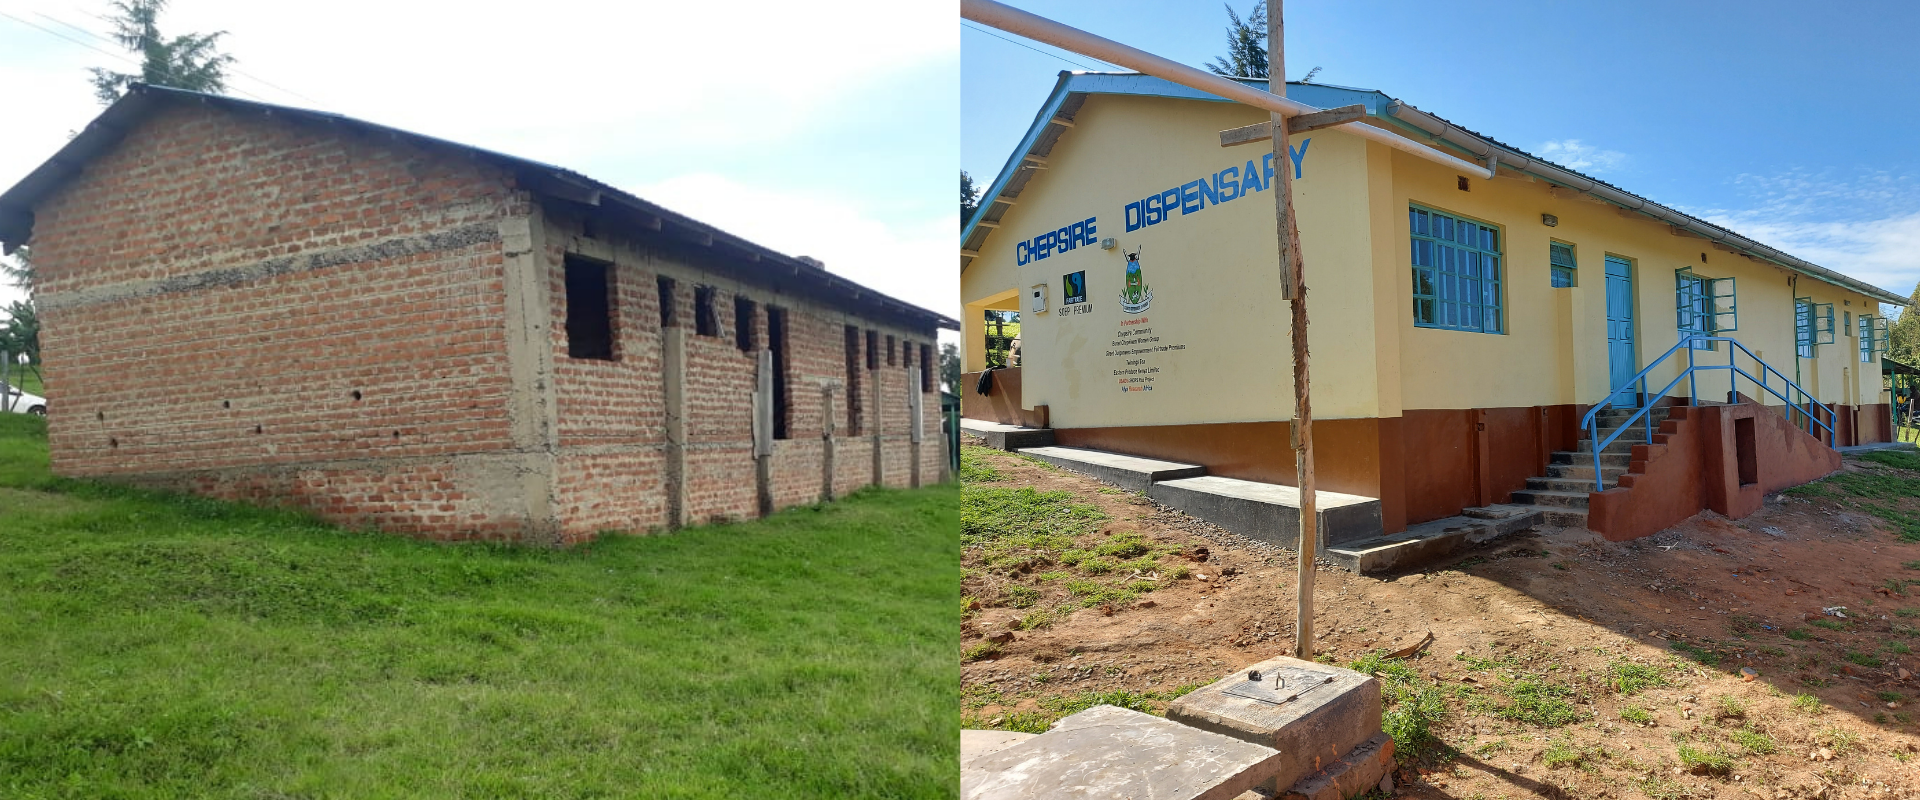 two images of the Chepsire Health Dispensary, one before renovations, one after.